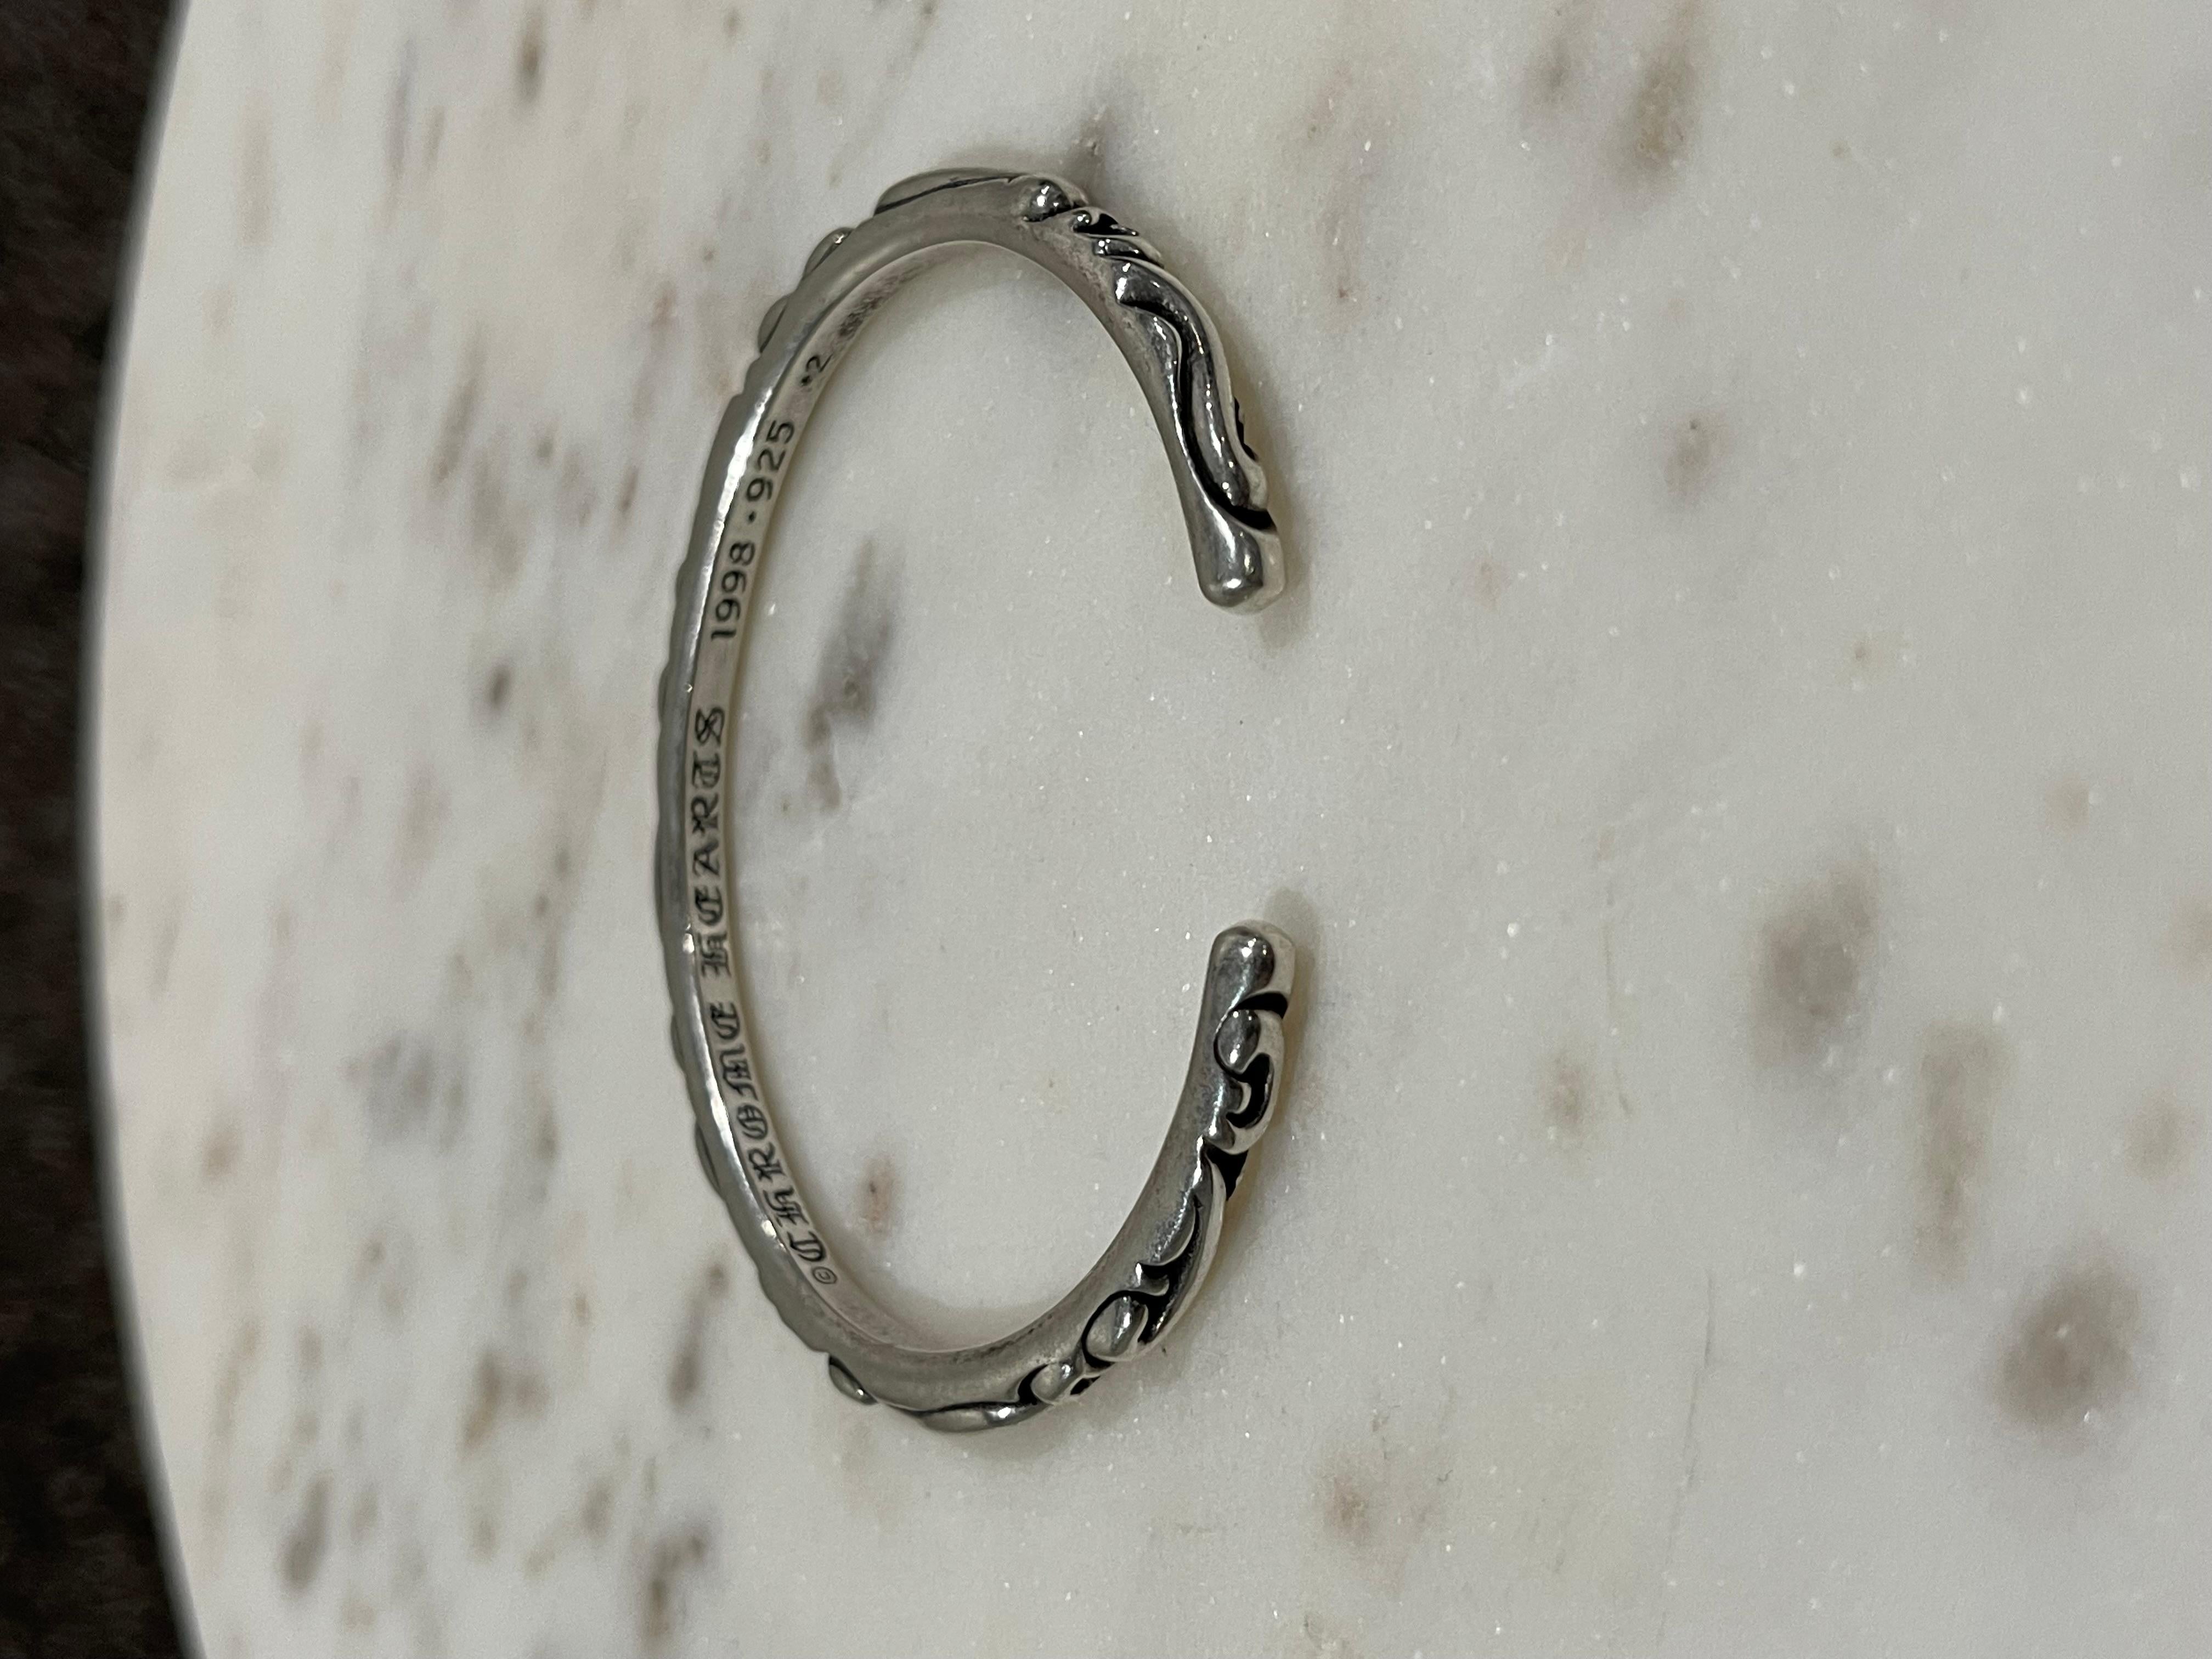 Chrome Hearts Scroll Bangle Silver Bracelet In Good Condition For Sale In Bear, DE